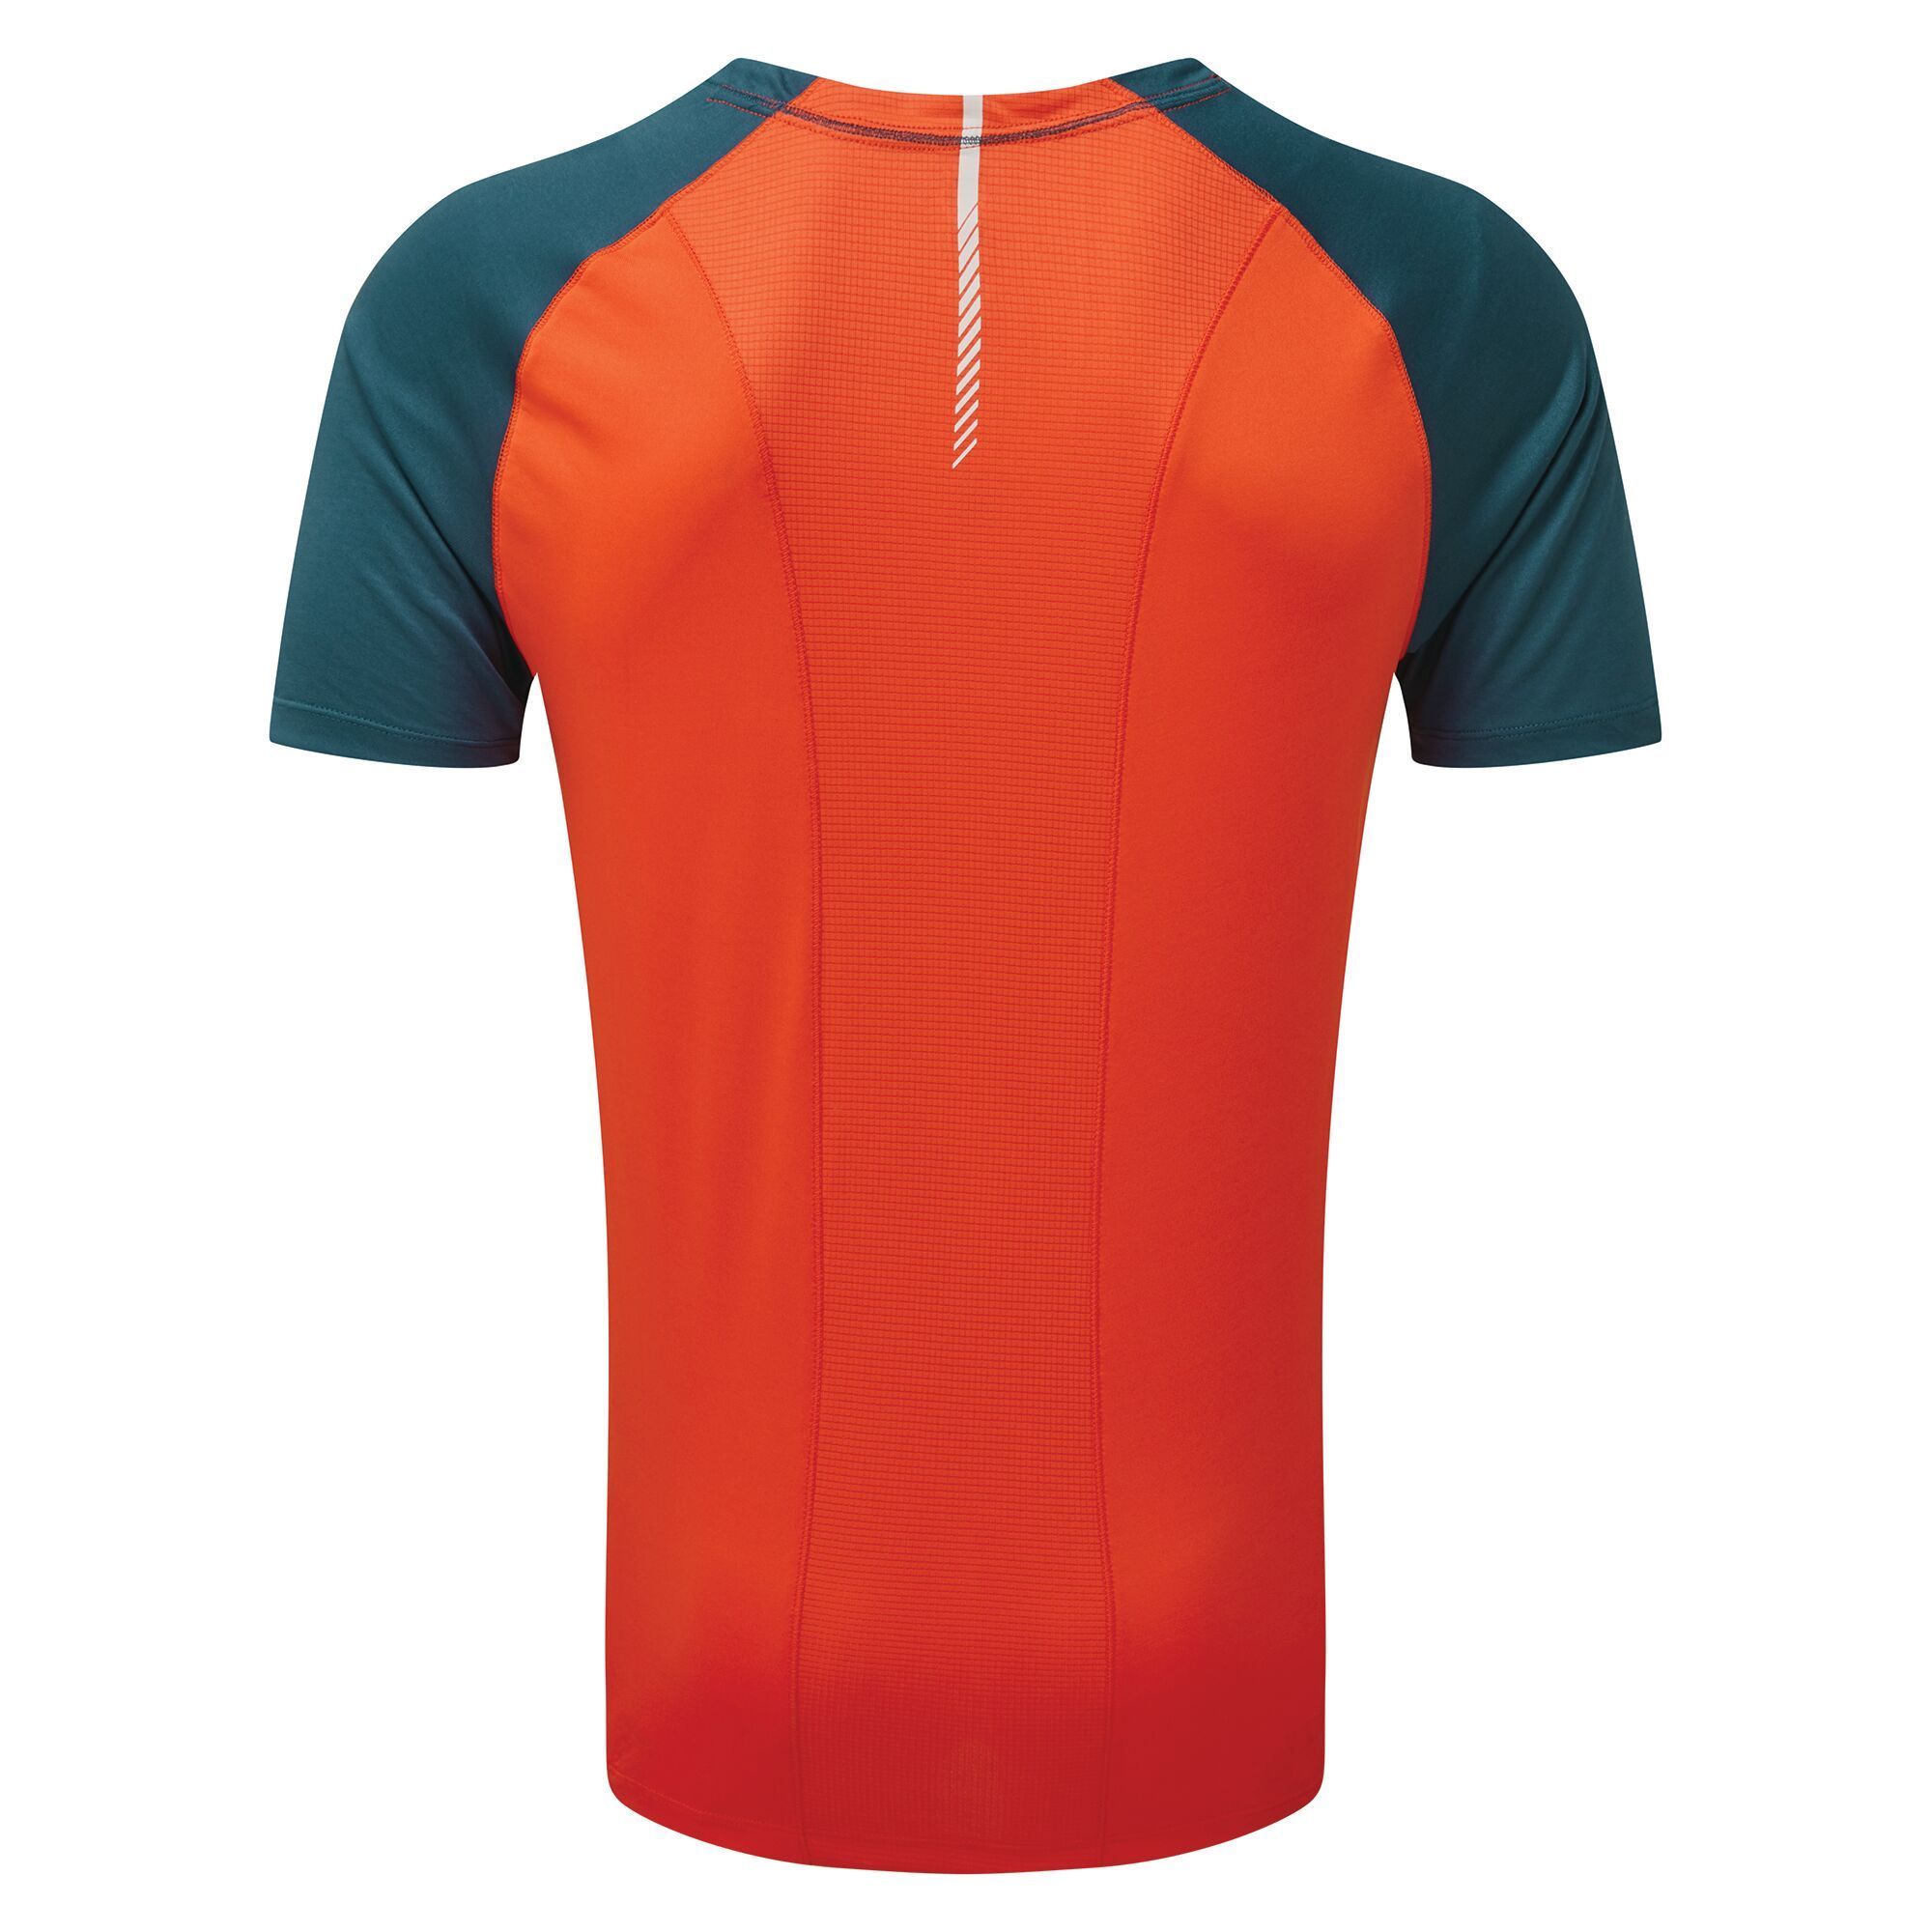 Material: 100% Polyester (Q-Wic Plus lightweight polyester fabric). Short sleeved t-shirt with breathable, airflow mesh ventilated panel back. Designed for high-intensity workouts and other activities like hiking. Anti-bacterial odour control treatment. Reflective Dare 2B logo print detail.